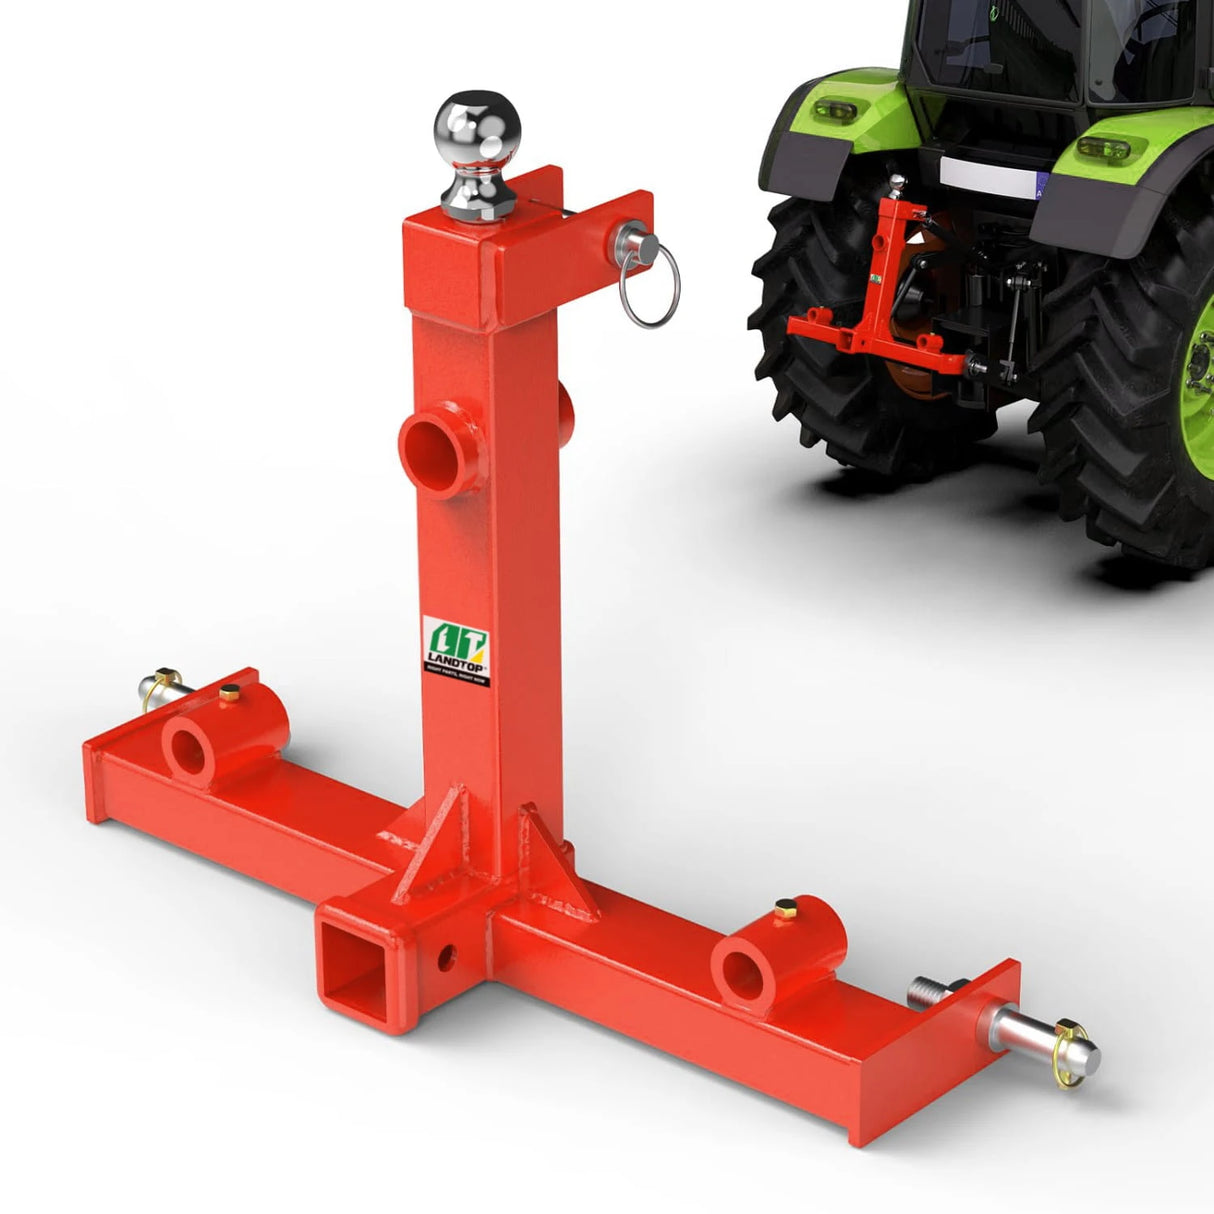 3000lbs 3 Point Trailer Hitch with 2" Receiver Hitch & Trailer Ball Drawbar Gooseneck Receivers for Category 1 Tractors